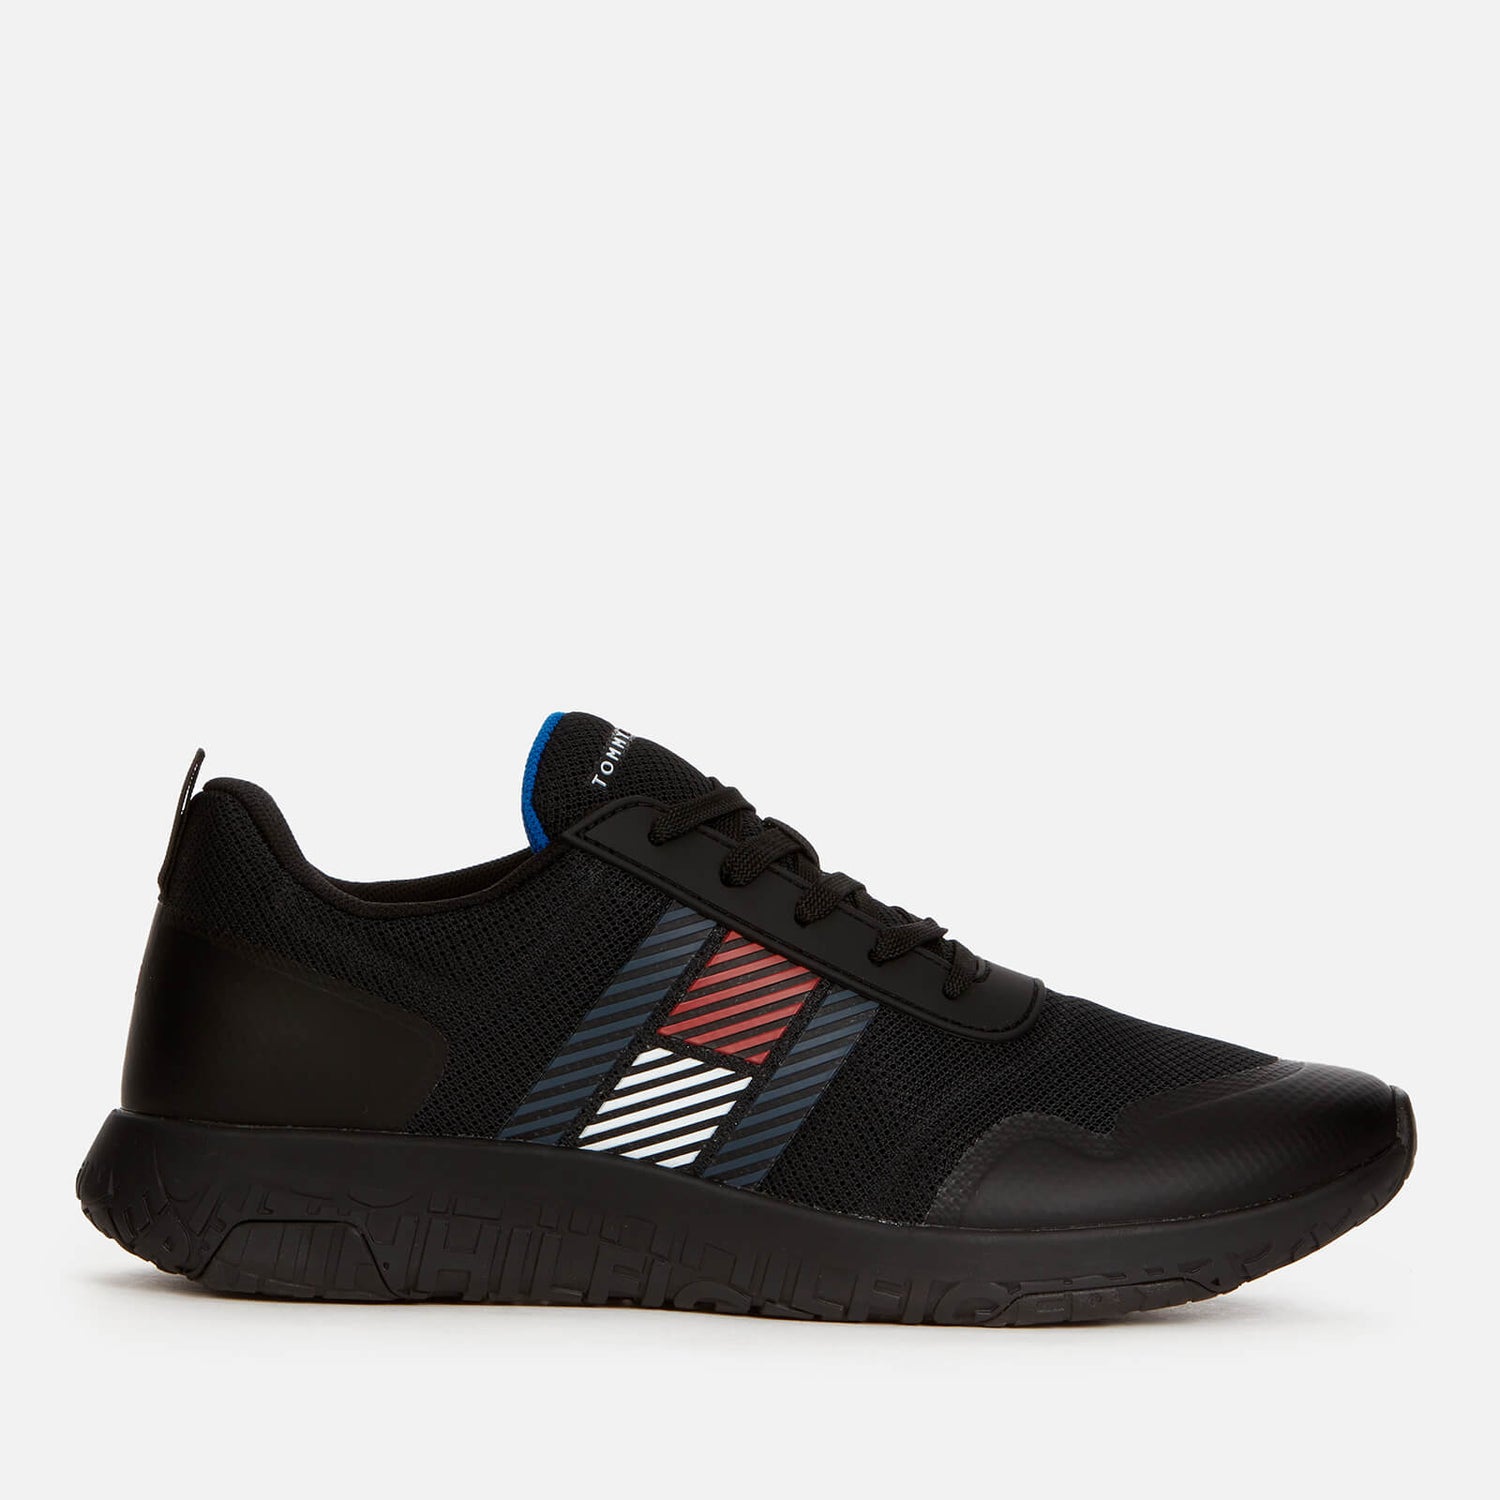 Tommy Hilfiger Men's Lightweight Flag Mix Running Style Trainers - Black